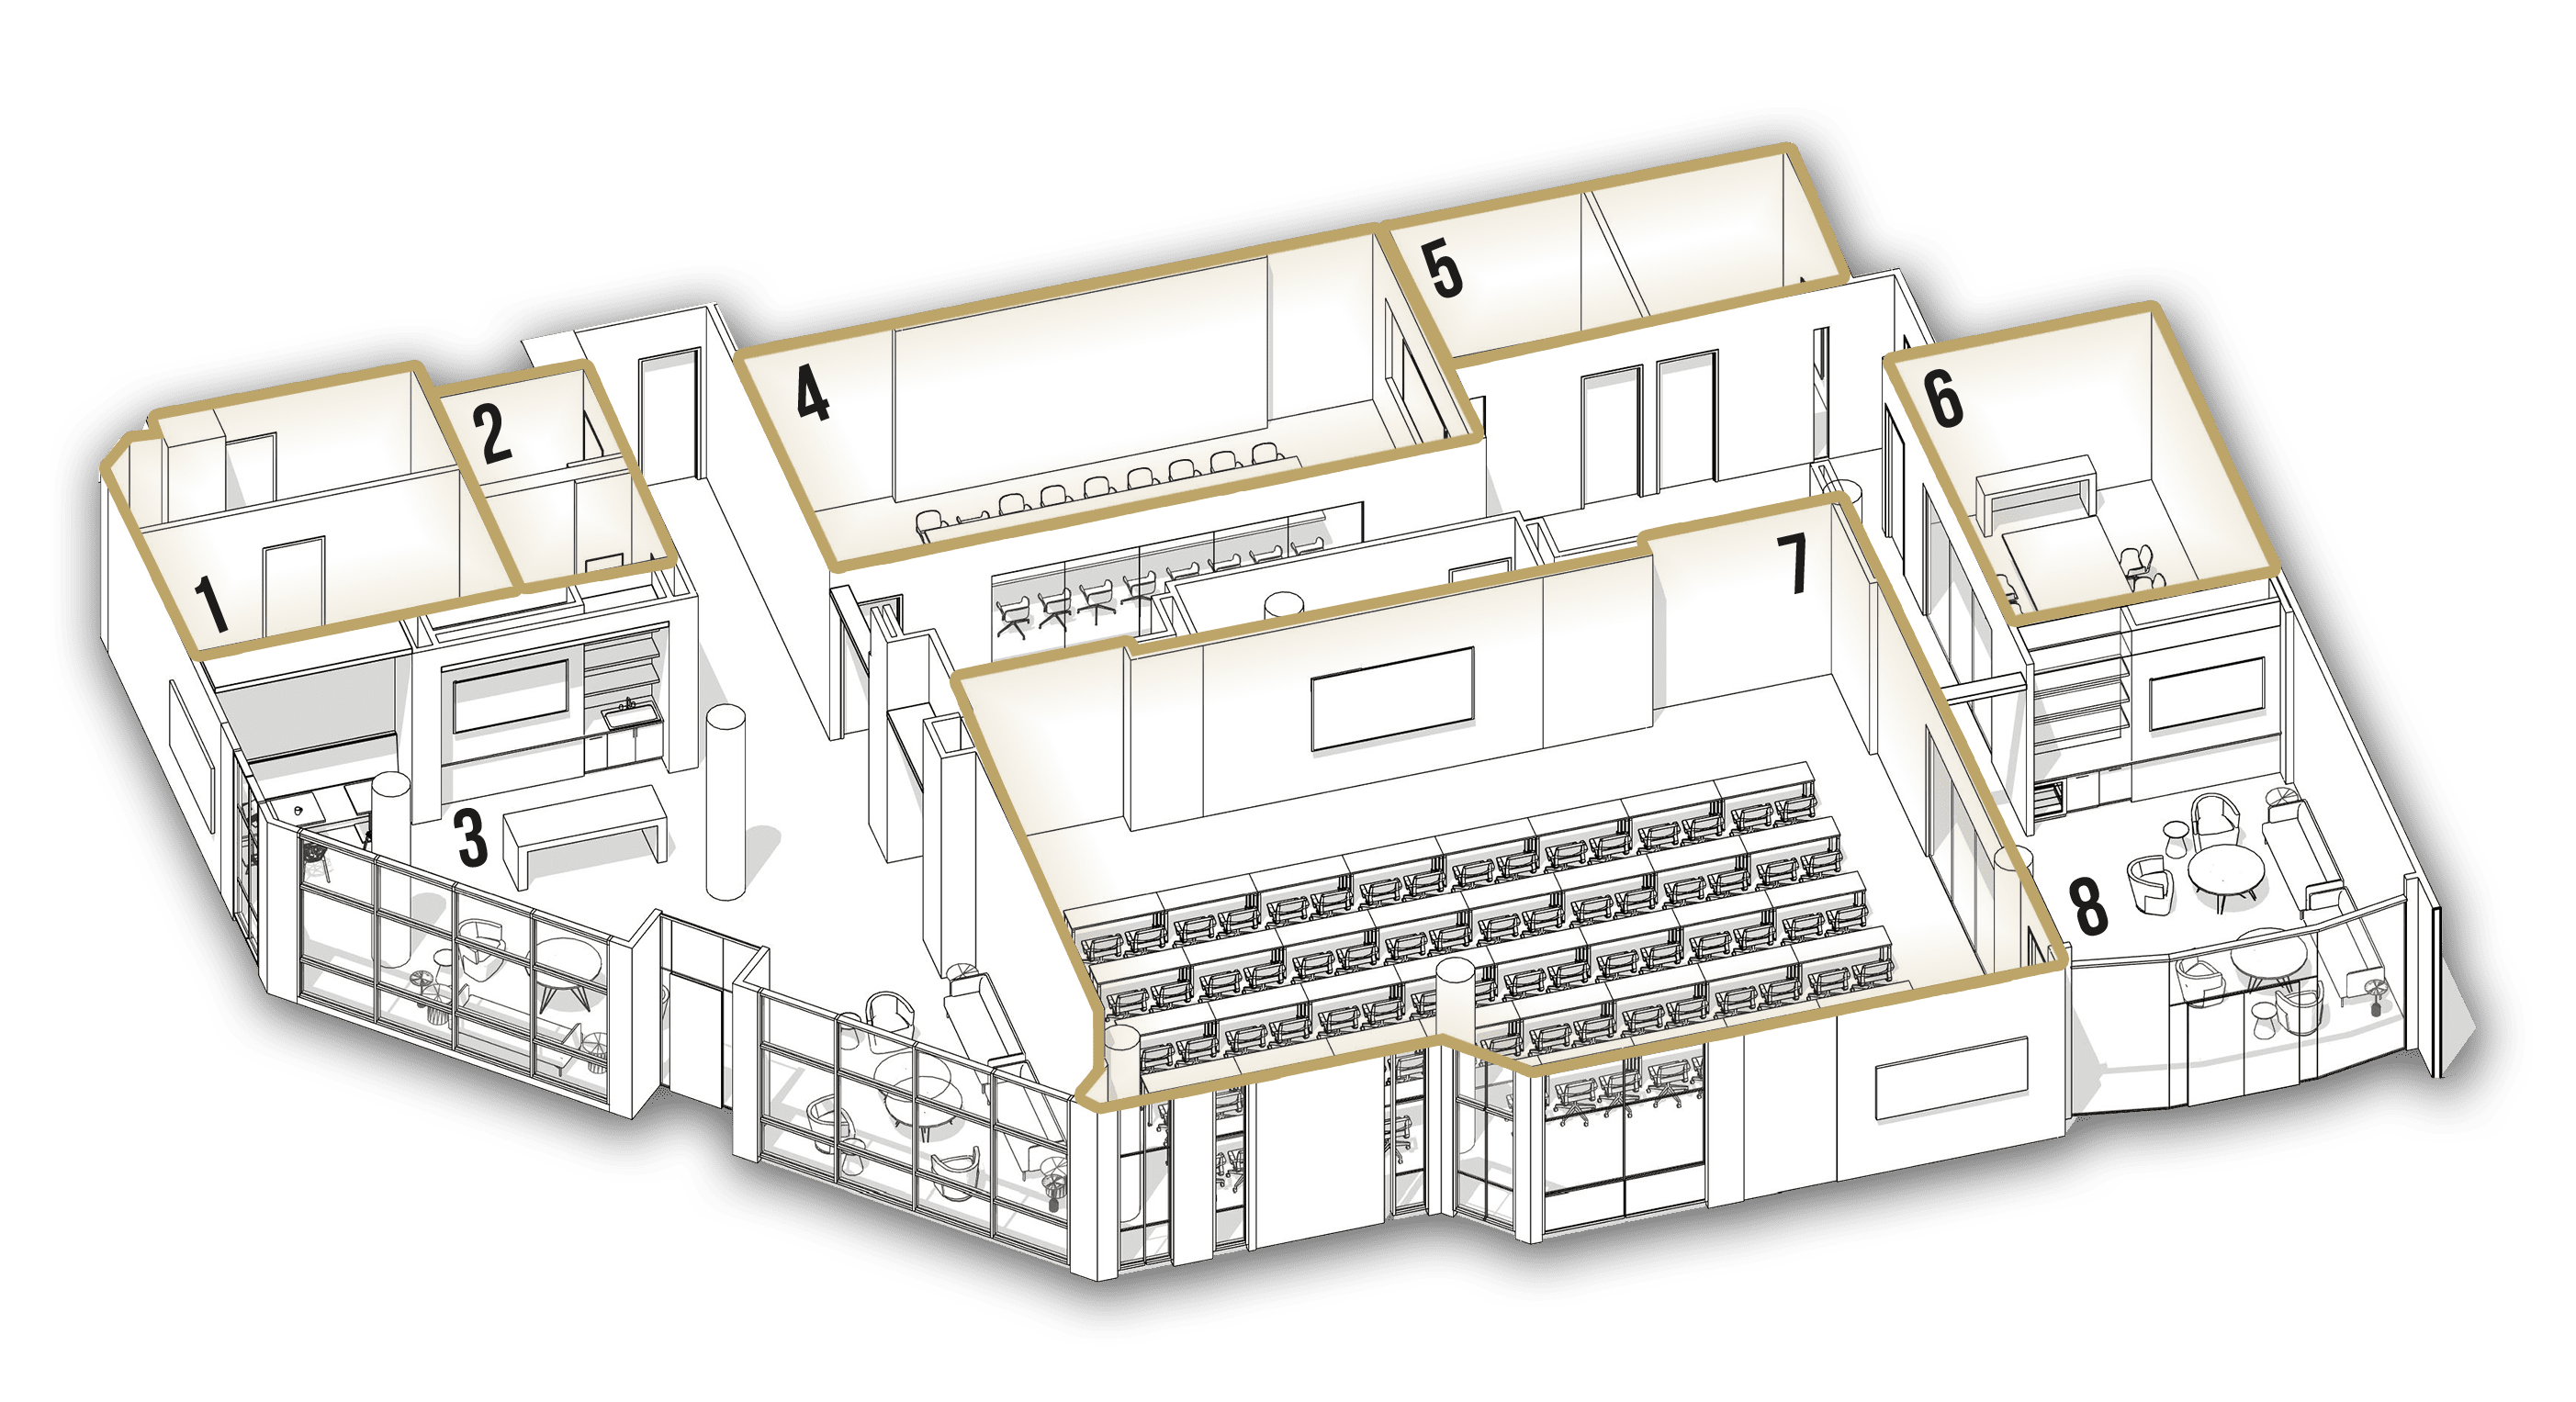 Bird's Eye View diagram of the conference center. 